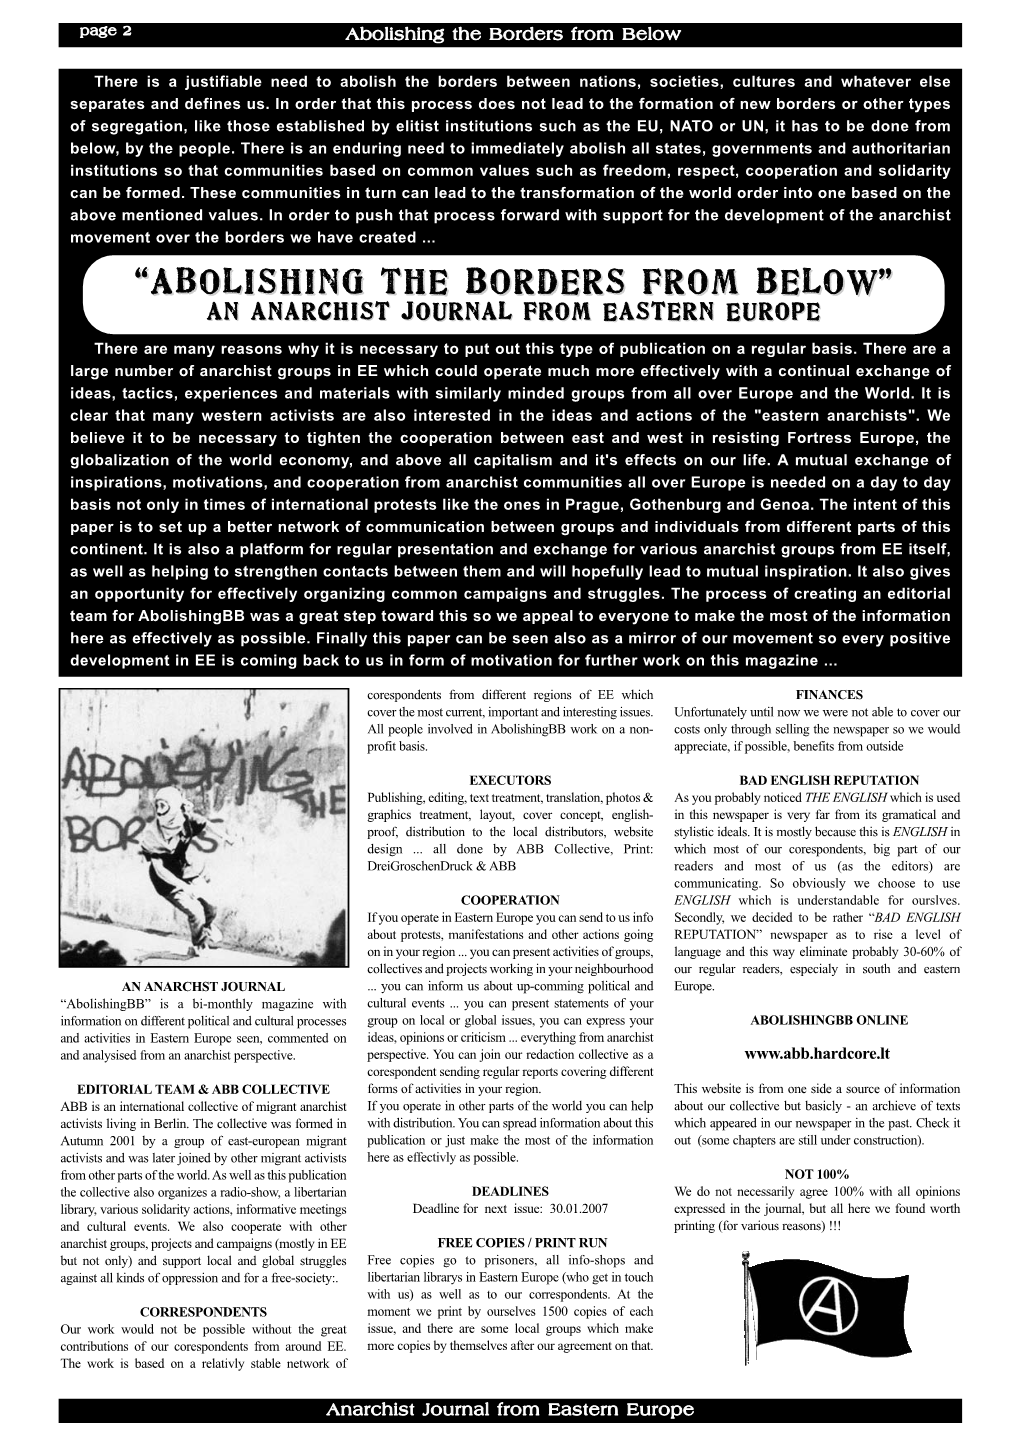 “Abolishing the Borders from Below” an Anarchist Journal from Eastern Europe